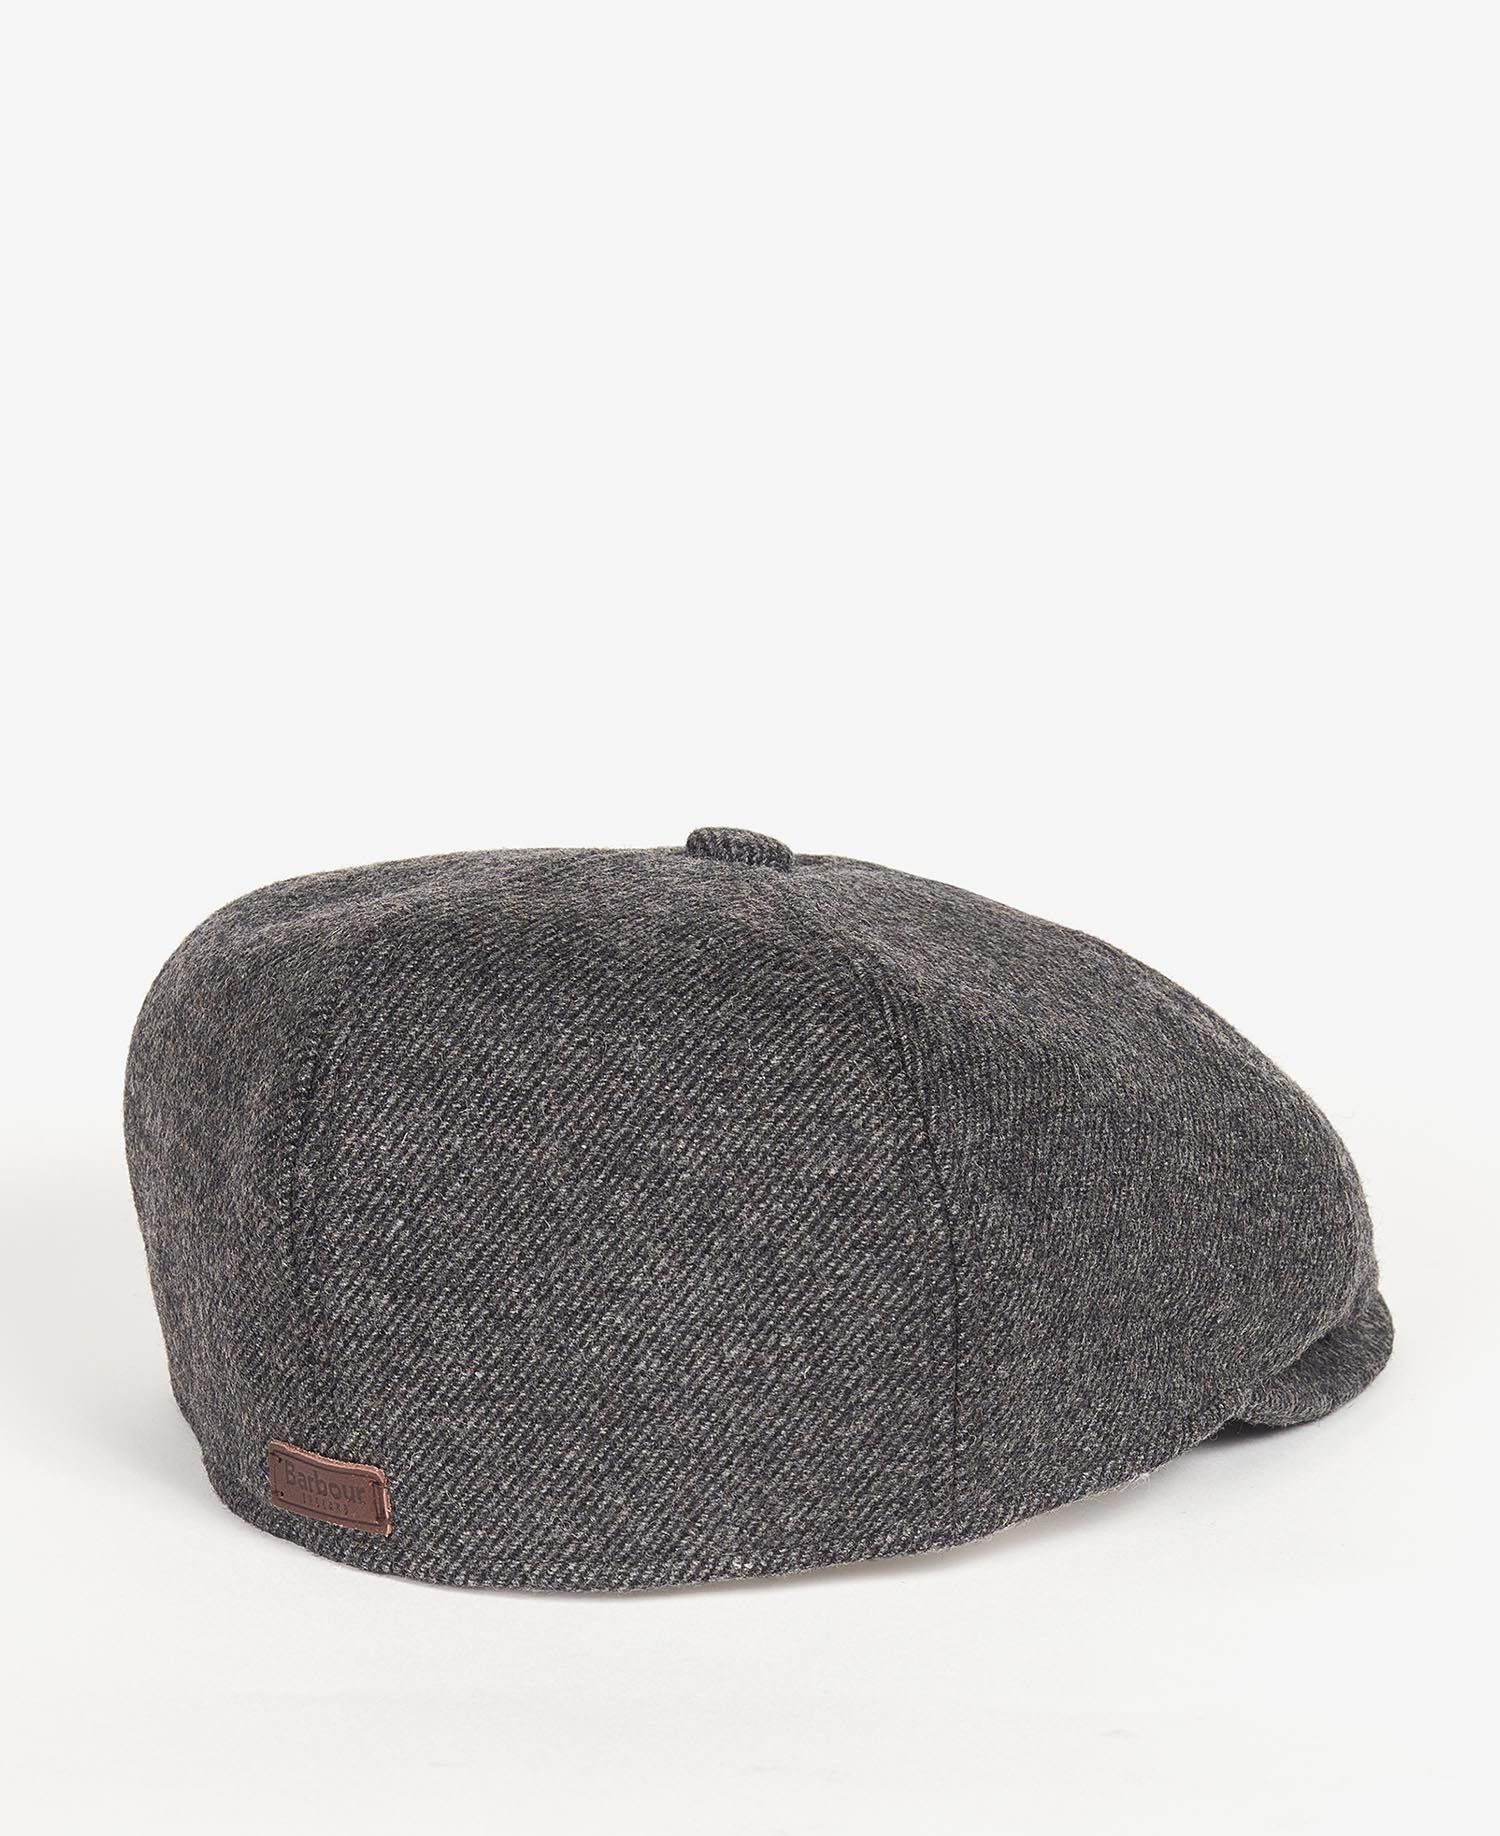 Barbour Claymore Bakerboy Hat CH15 Charcoal